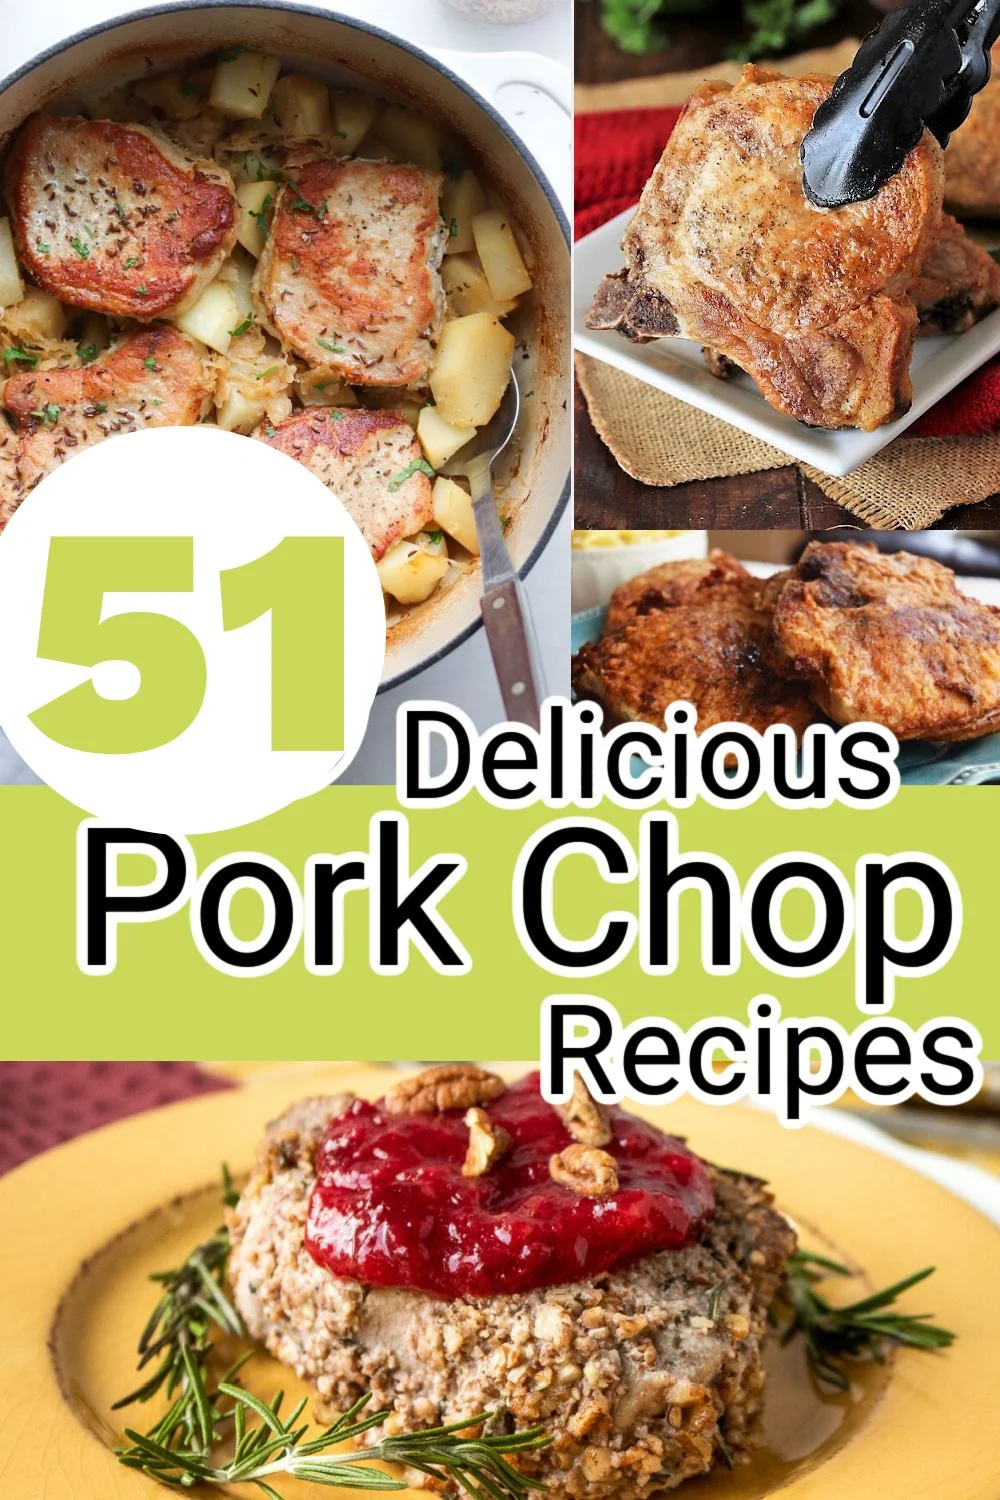 Pork chops collage with a text overlay that says 51 Delicious pork chop recipes